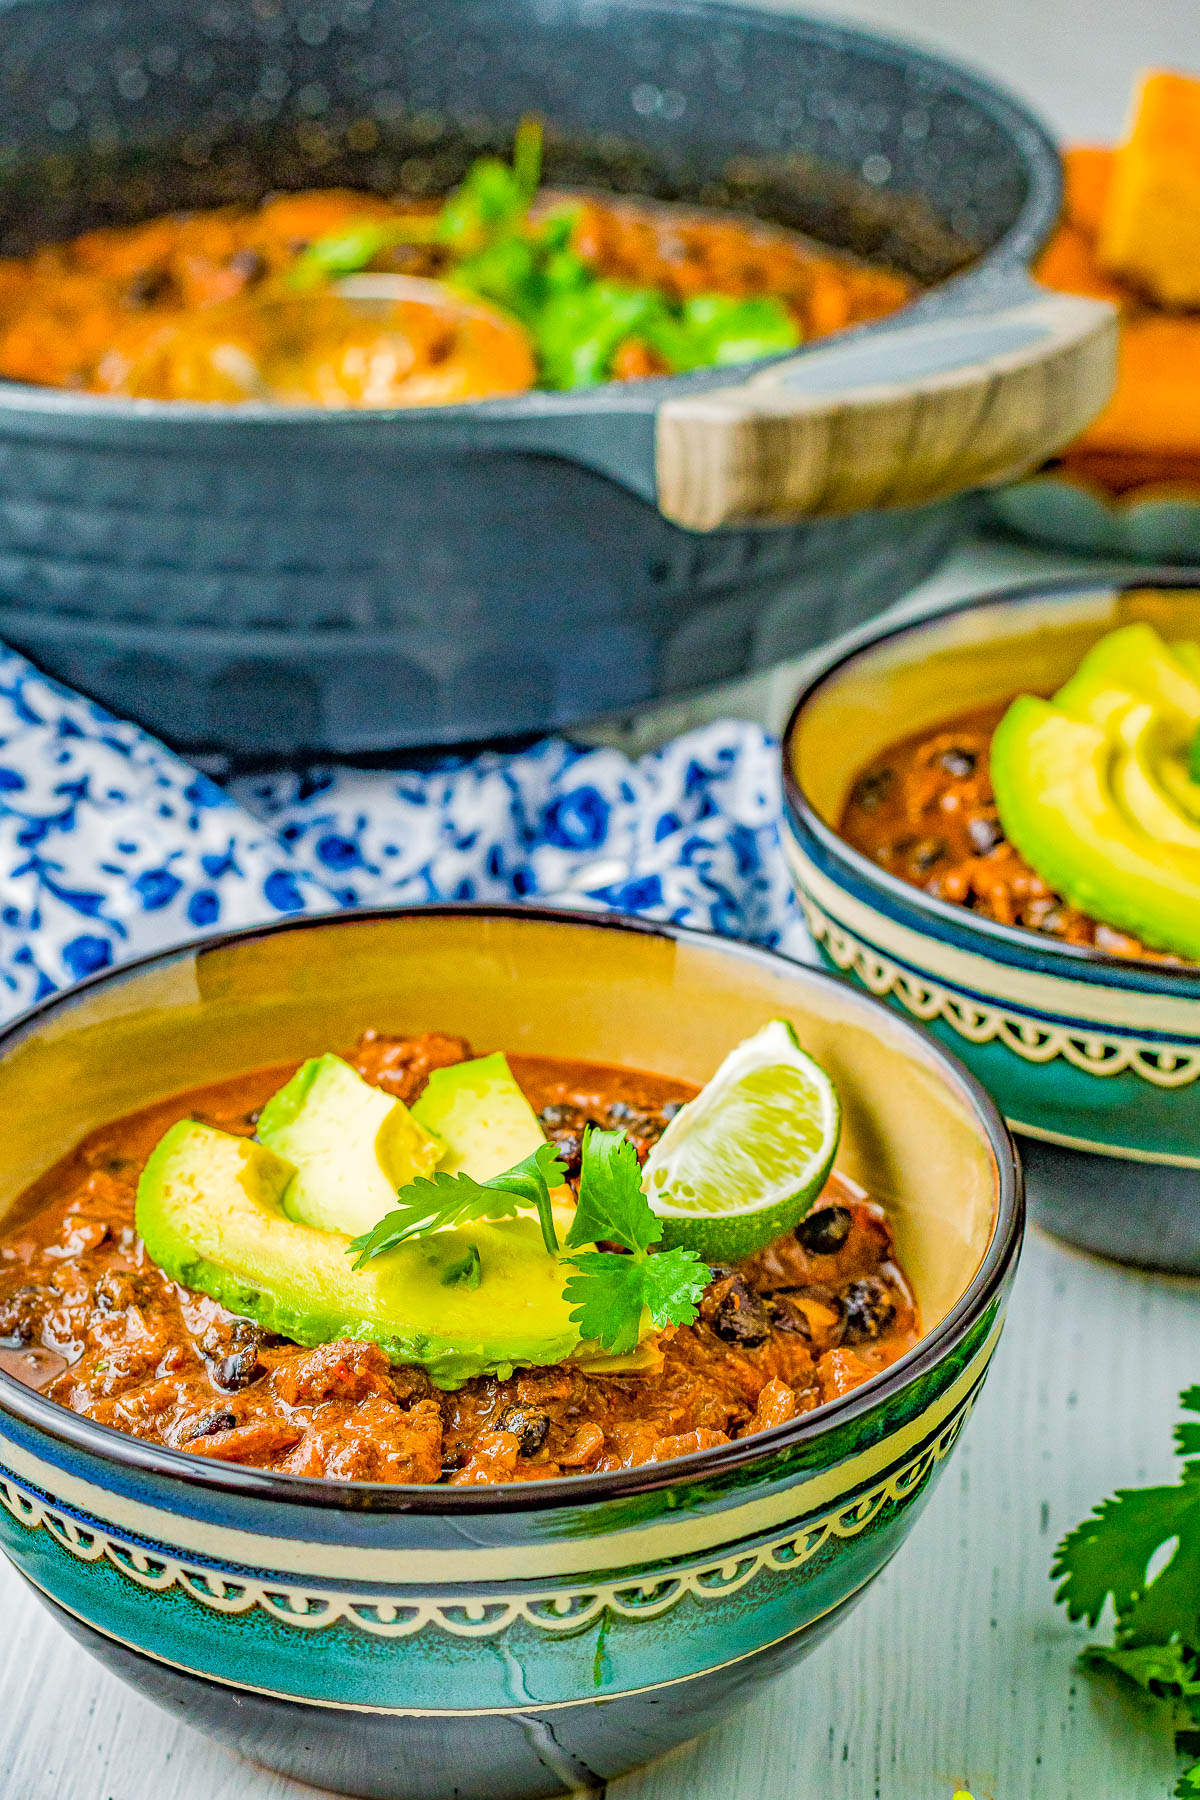 Triple Pork Black Bean Chili - Three types of pork including bacon, pork roast, and chorizo plus black beans and more in this comforting, hearty, and filling chili recipe! Easy and perfect for chilly weather, family dinners, or make it for game day or tailgating parties! 